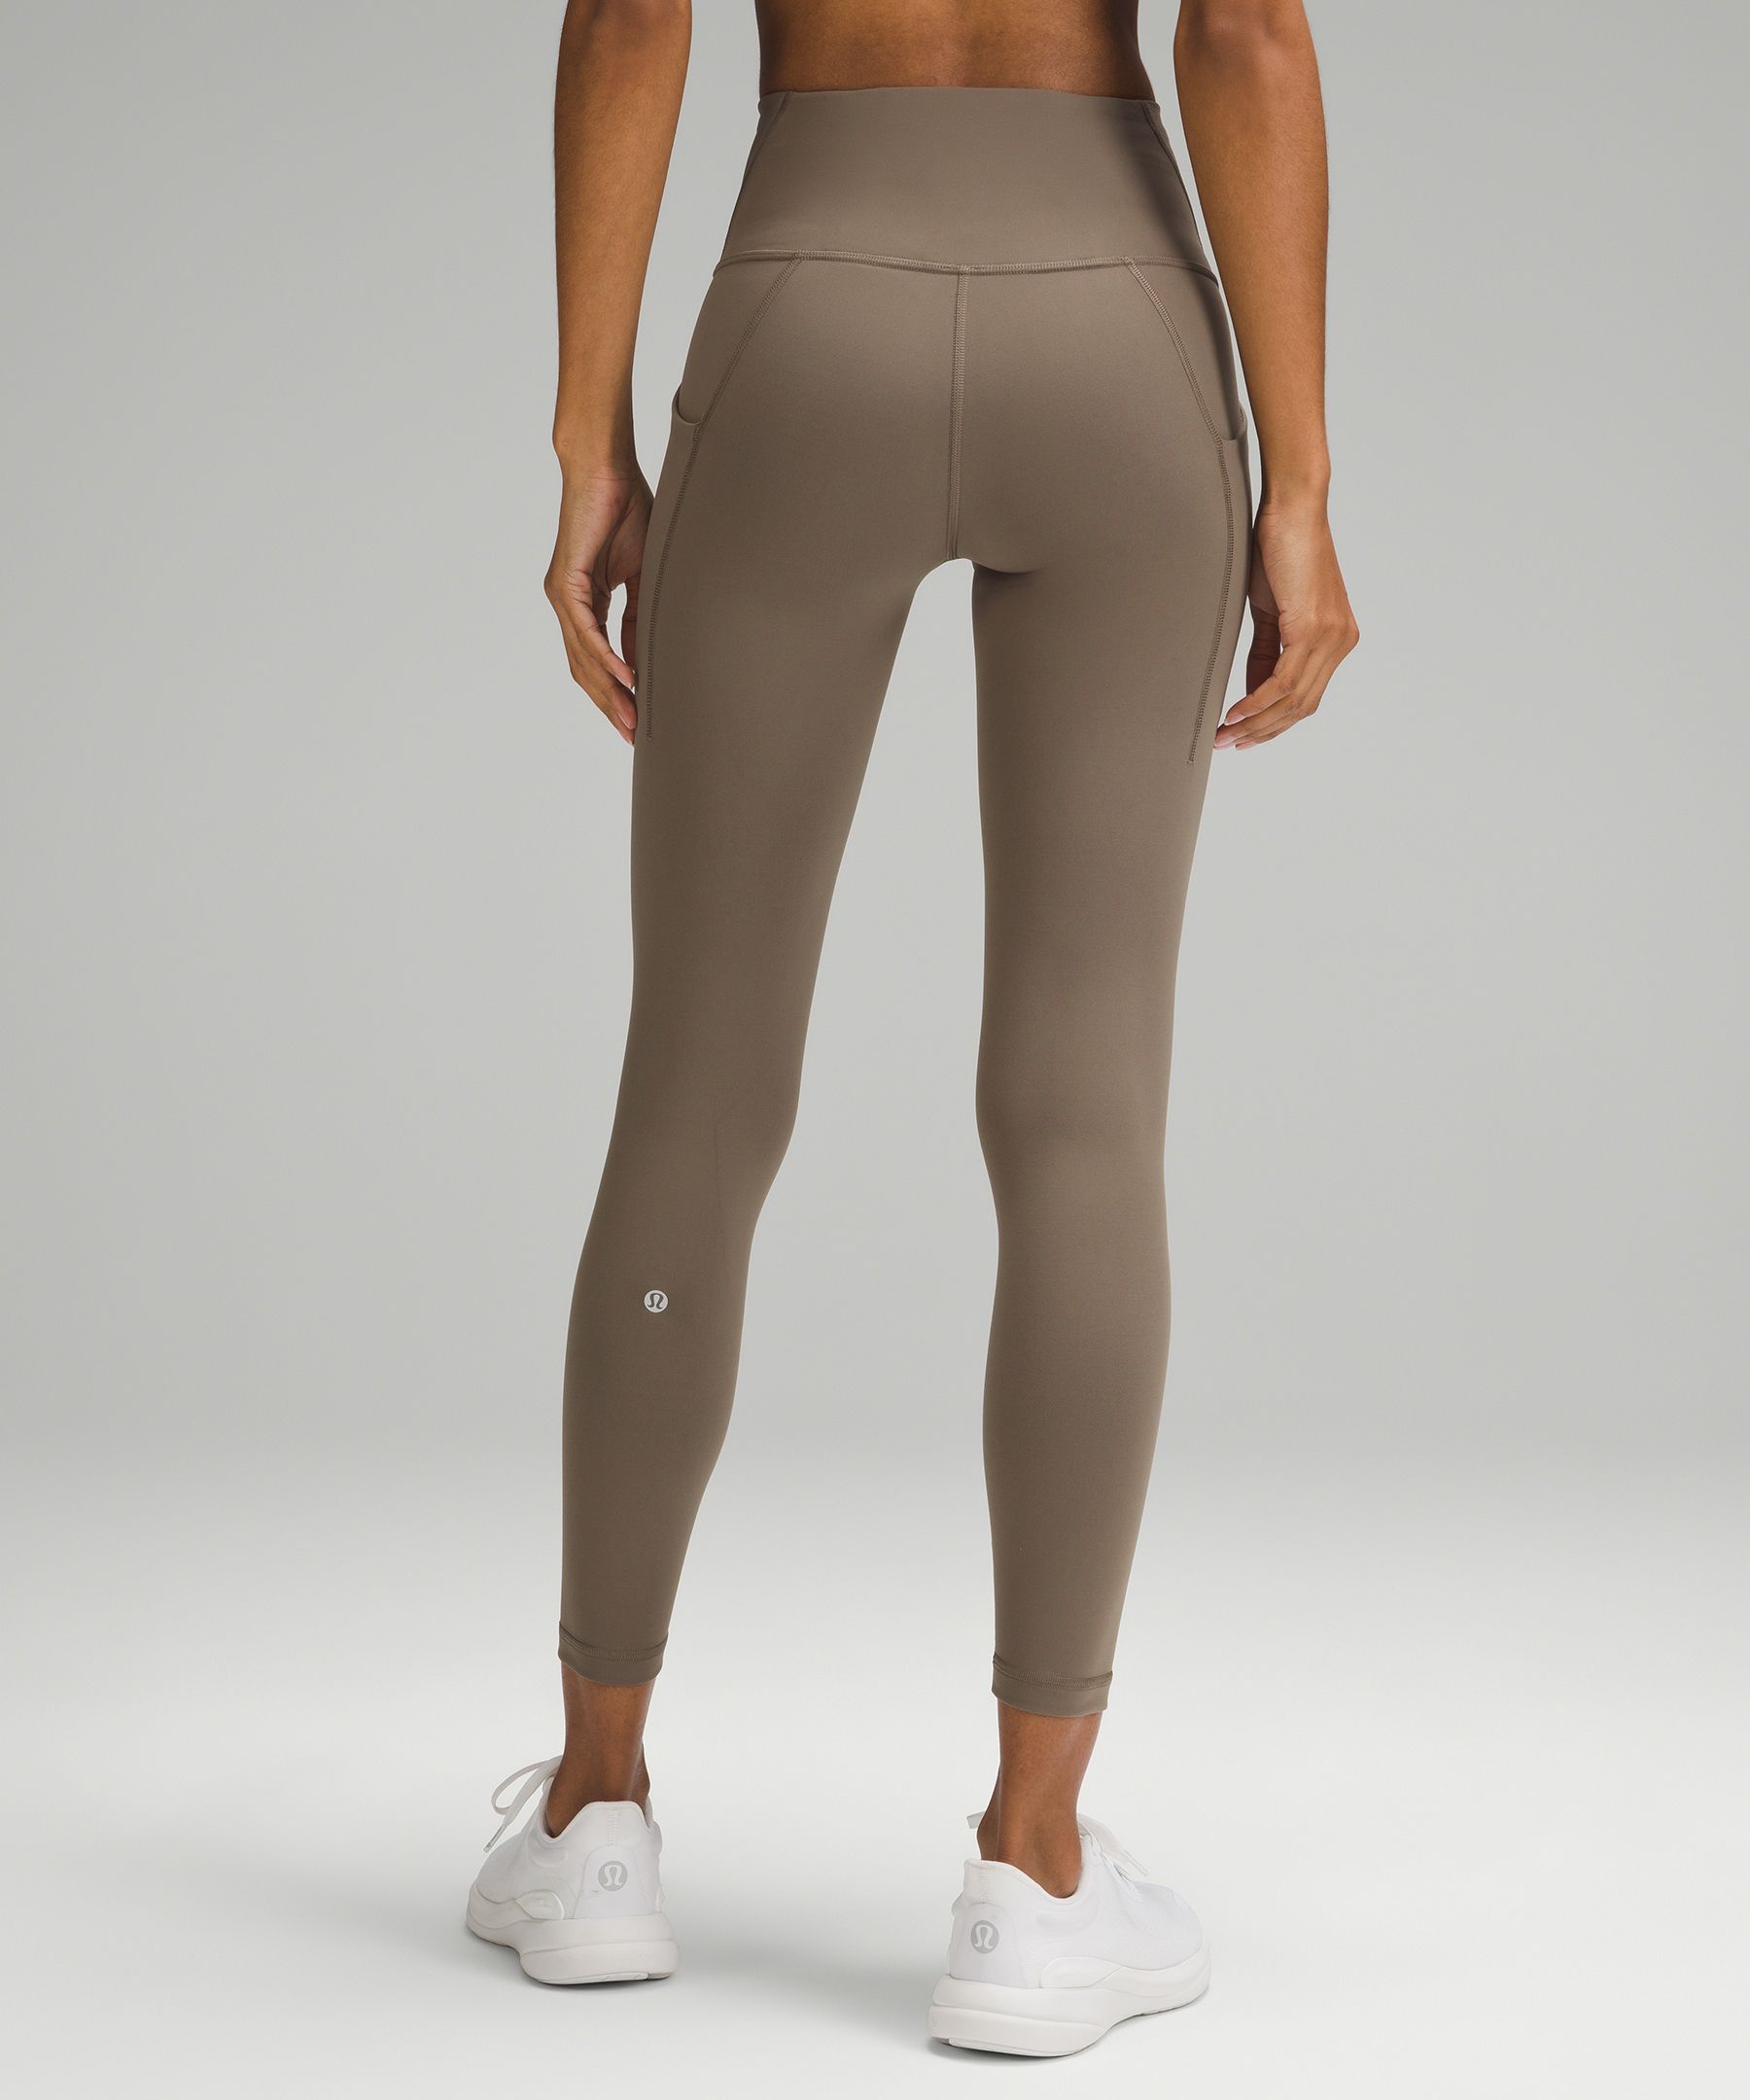 Wunder Train High-Rise Tight with Pockets 25 - Lululemon